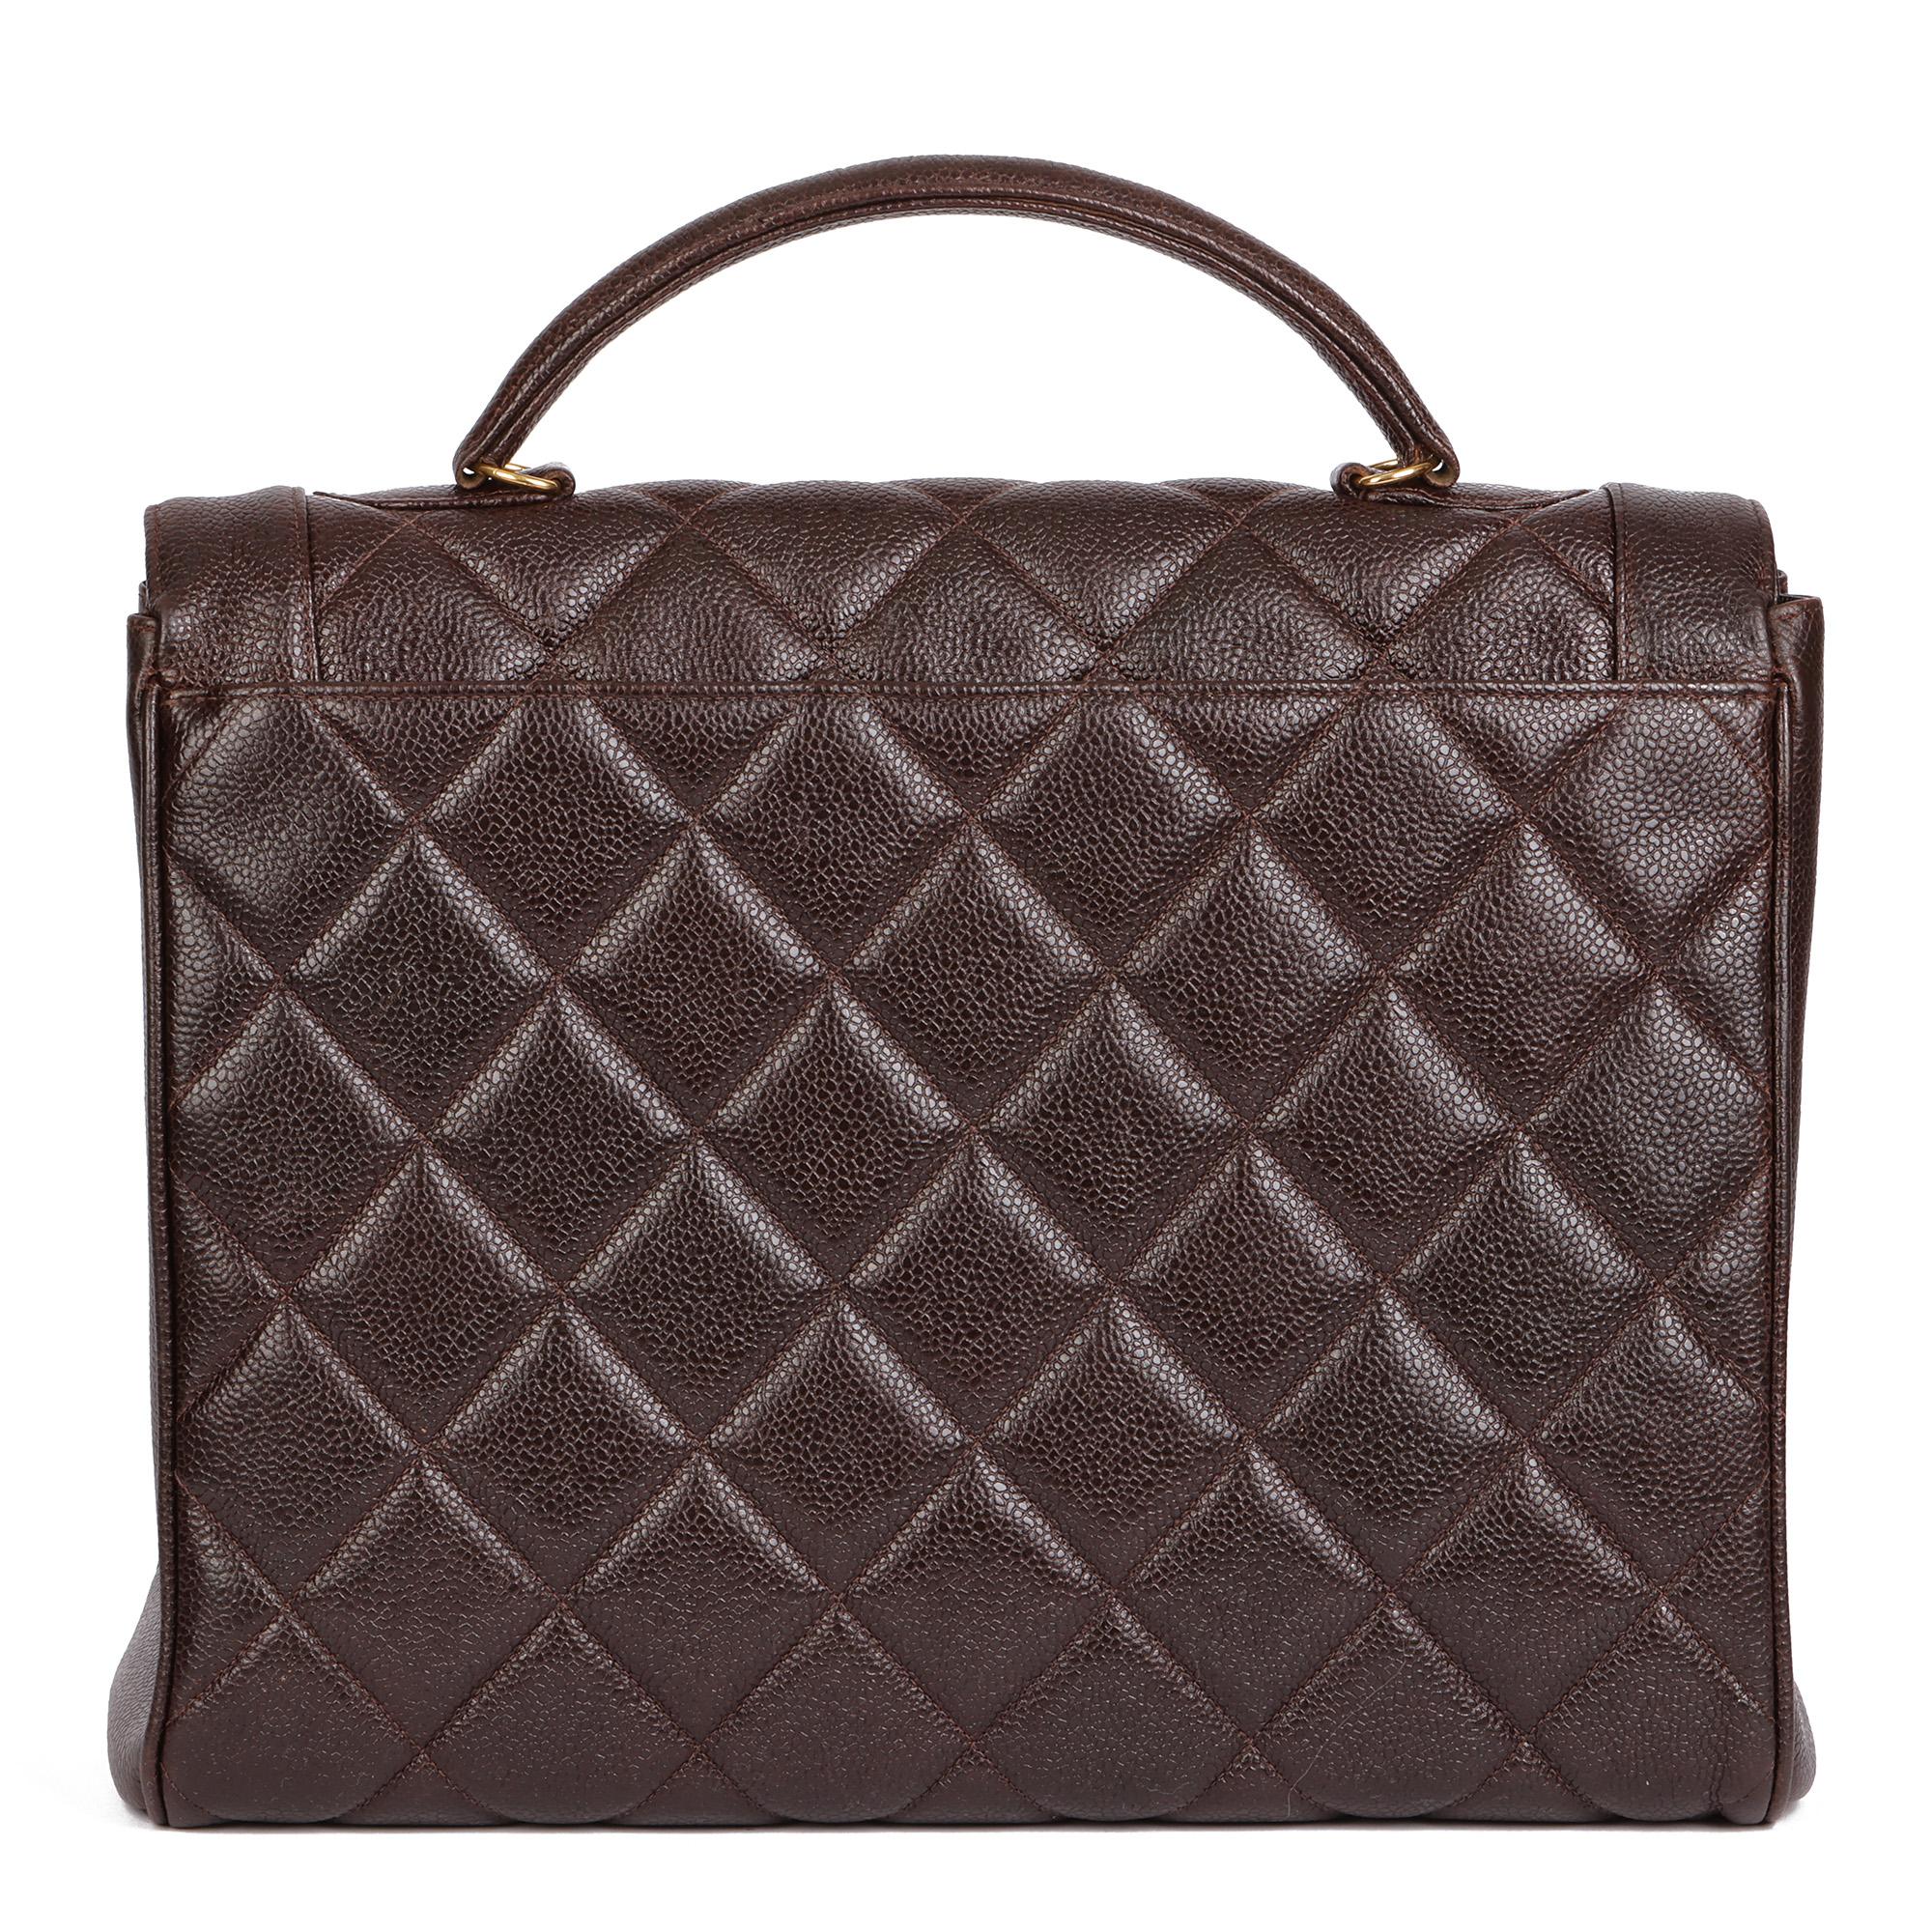 CHANEL Chocolate Brown Quilted Caviar Leather Vintage Classic Kelly In Excellent Condition For Sale In Bishop's Stortford, Hertfordshire